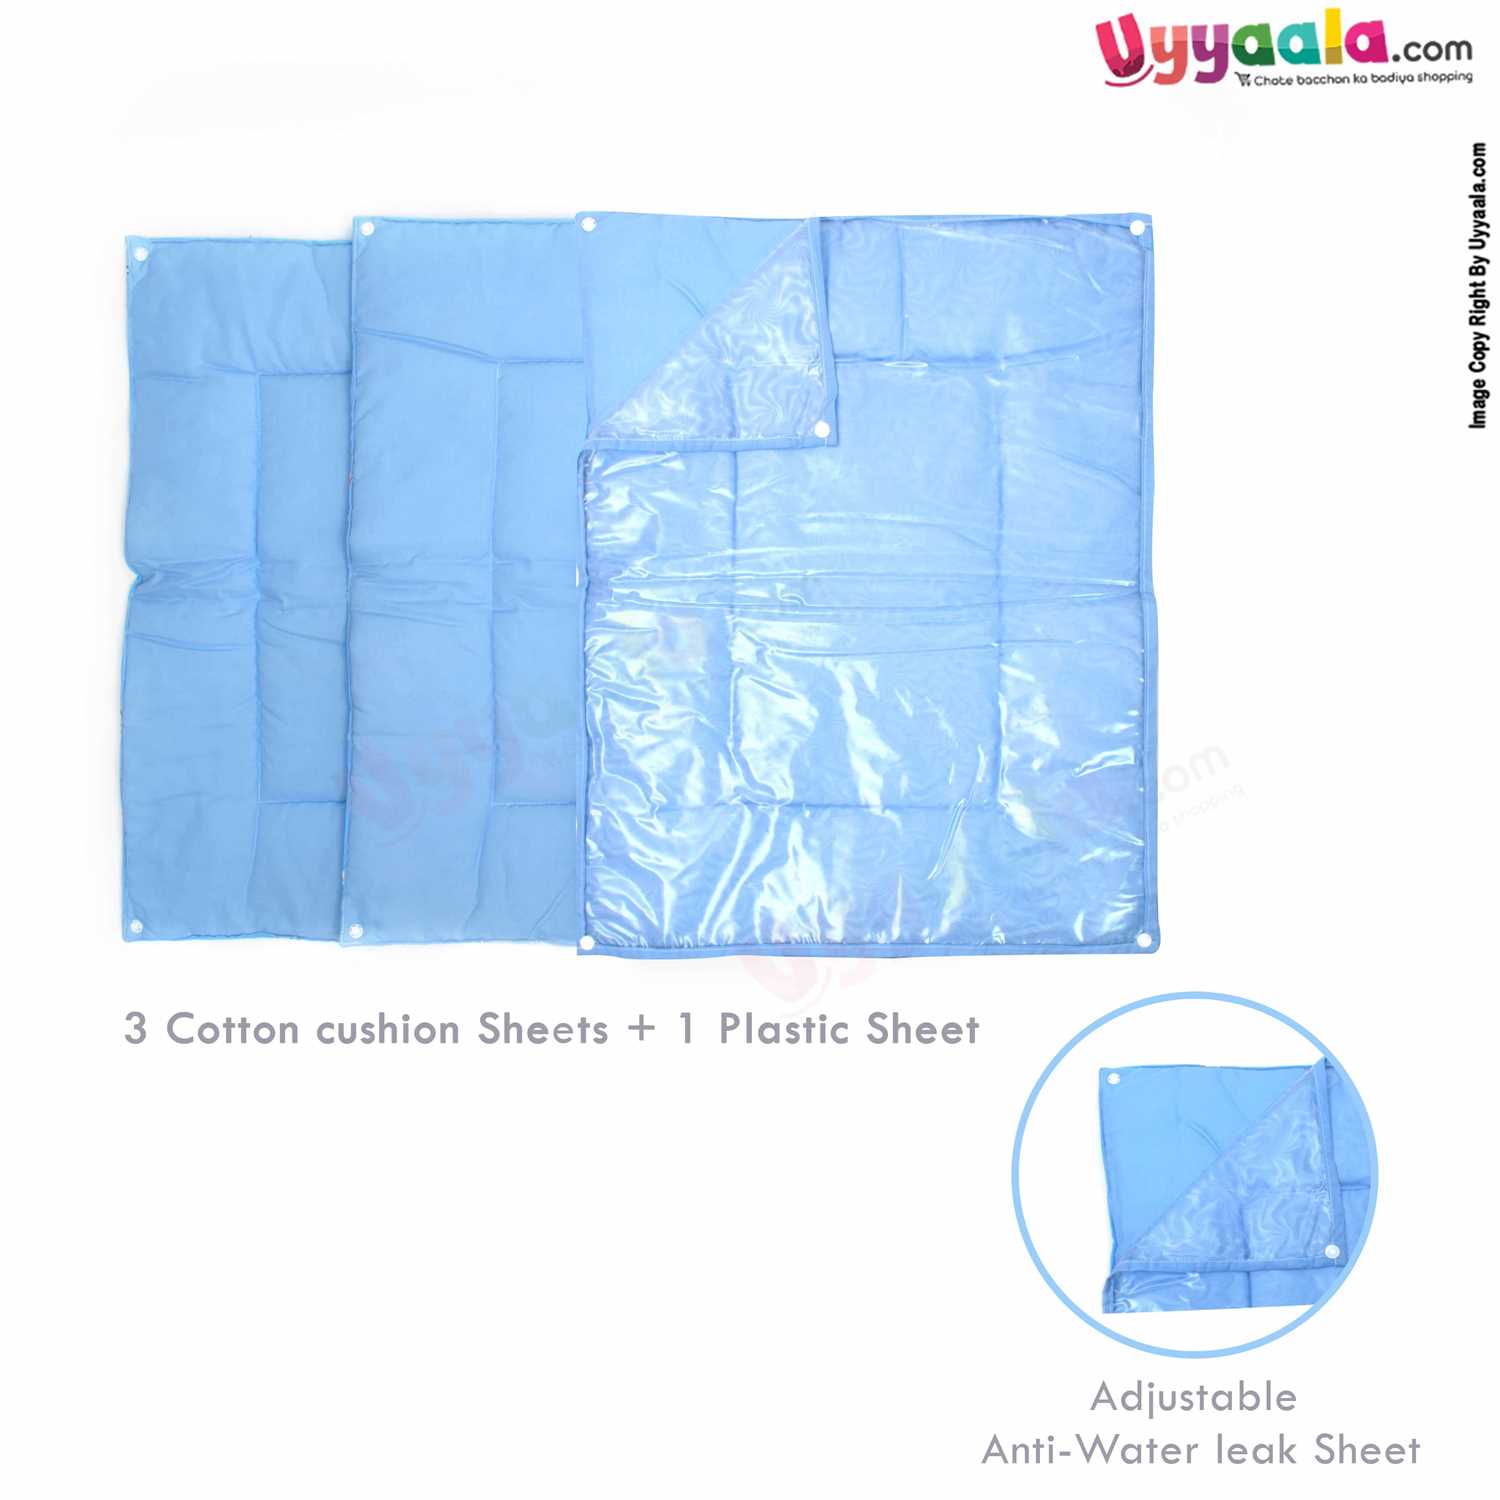 Cotton Foam Cushioned & Plastic detachable Changing Sheets 3 in 1 Set With Bear & Ballon Print - Blue